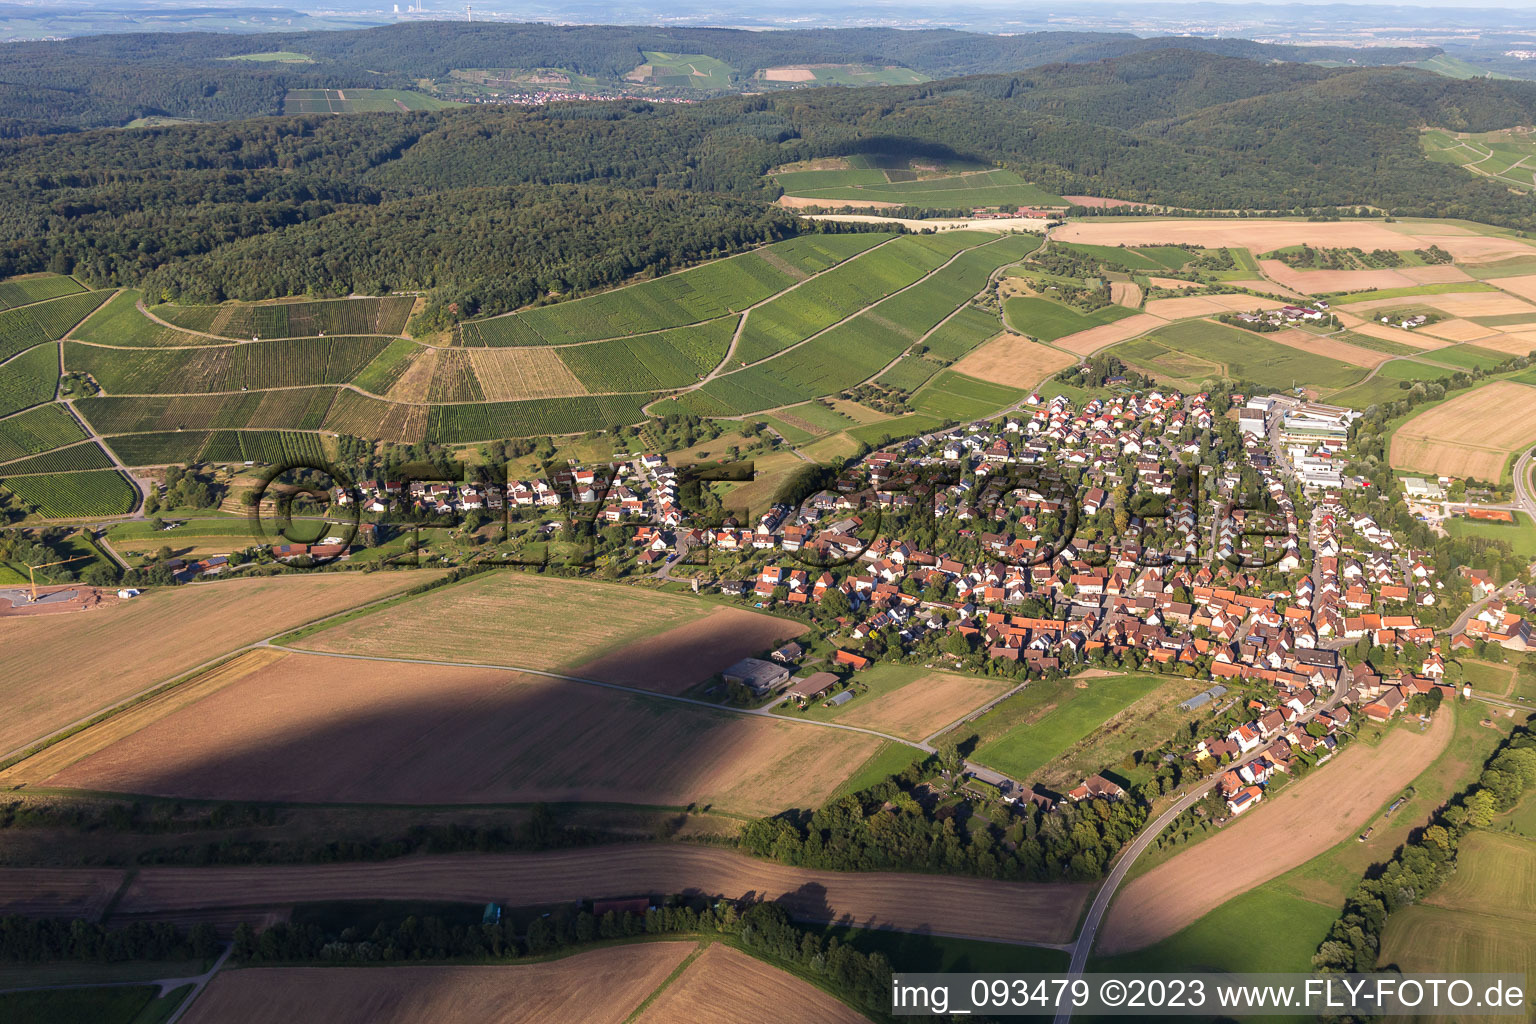 Aerial view of Village - view on the edge of agricultural fields and farmland in Vaihingen an der Enz in the state Baden-Wurttemberg, Germany